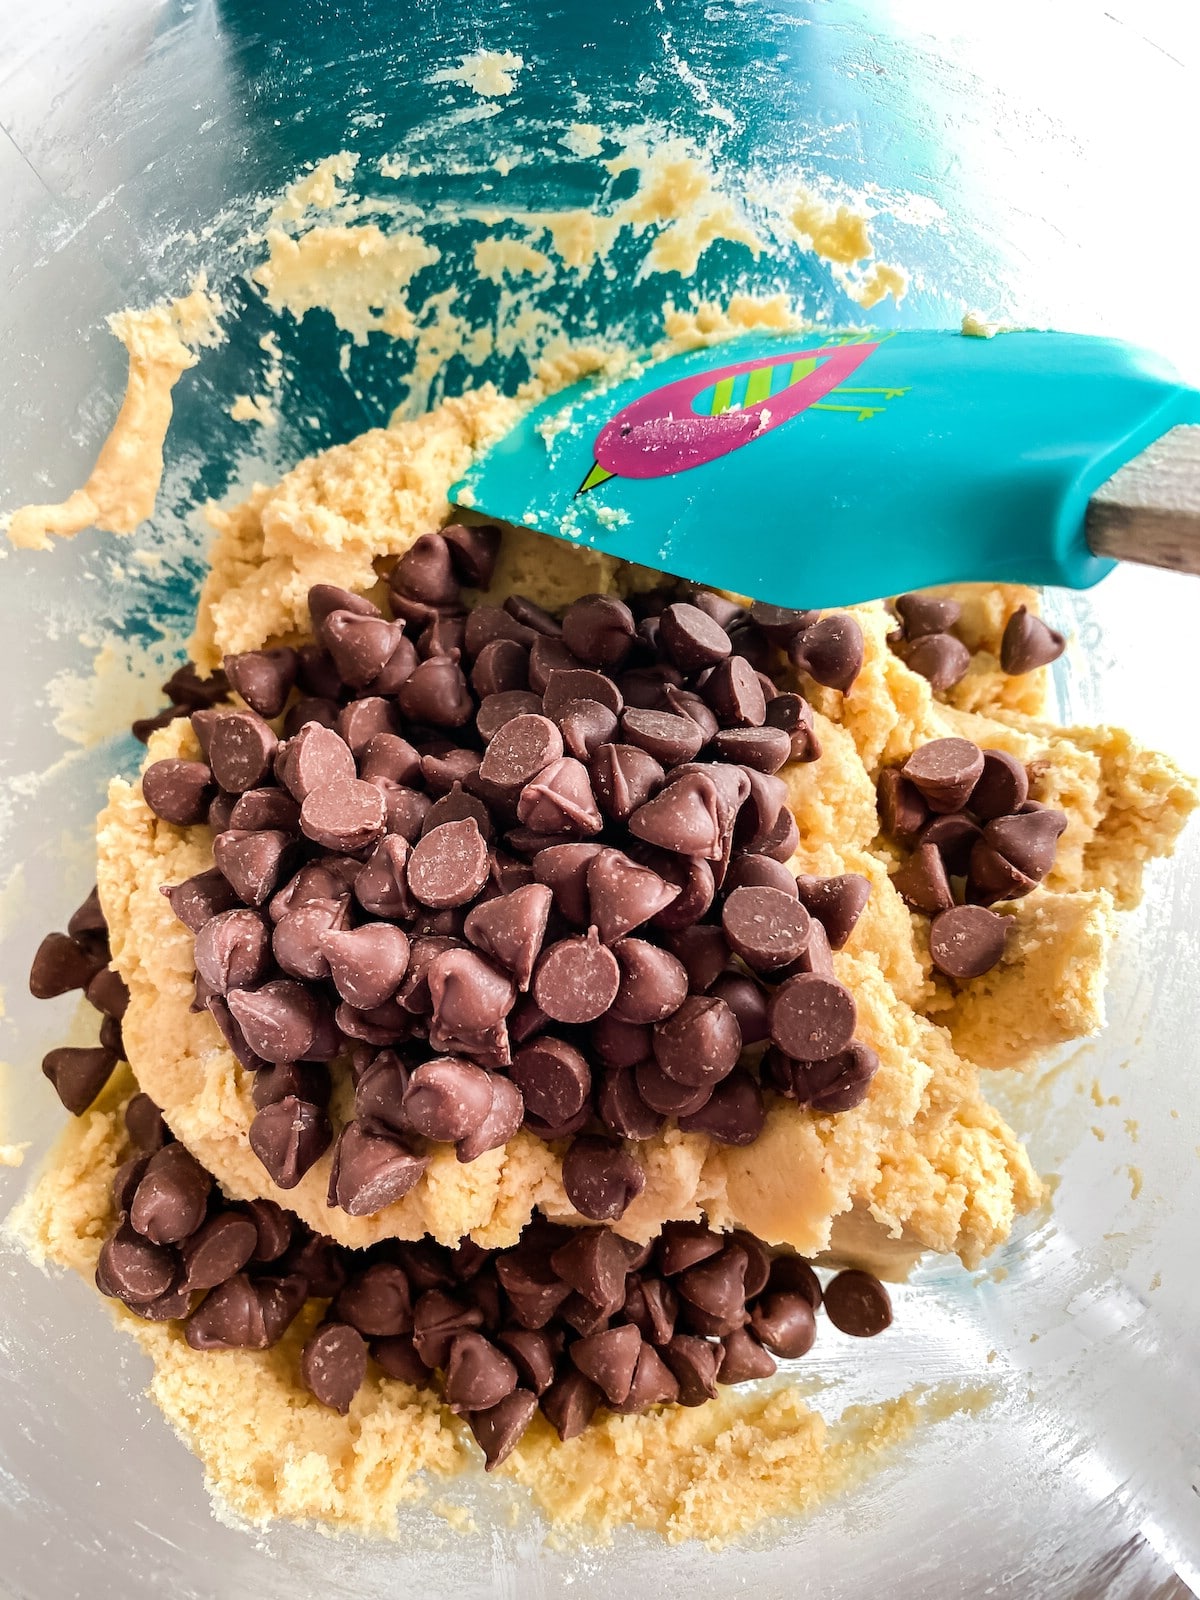 Folding chips into cookie dough